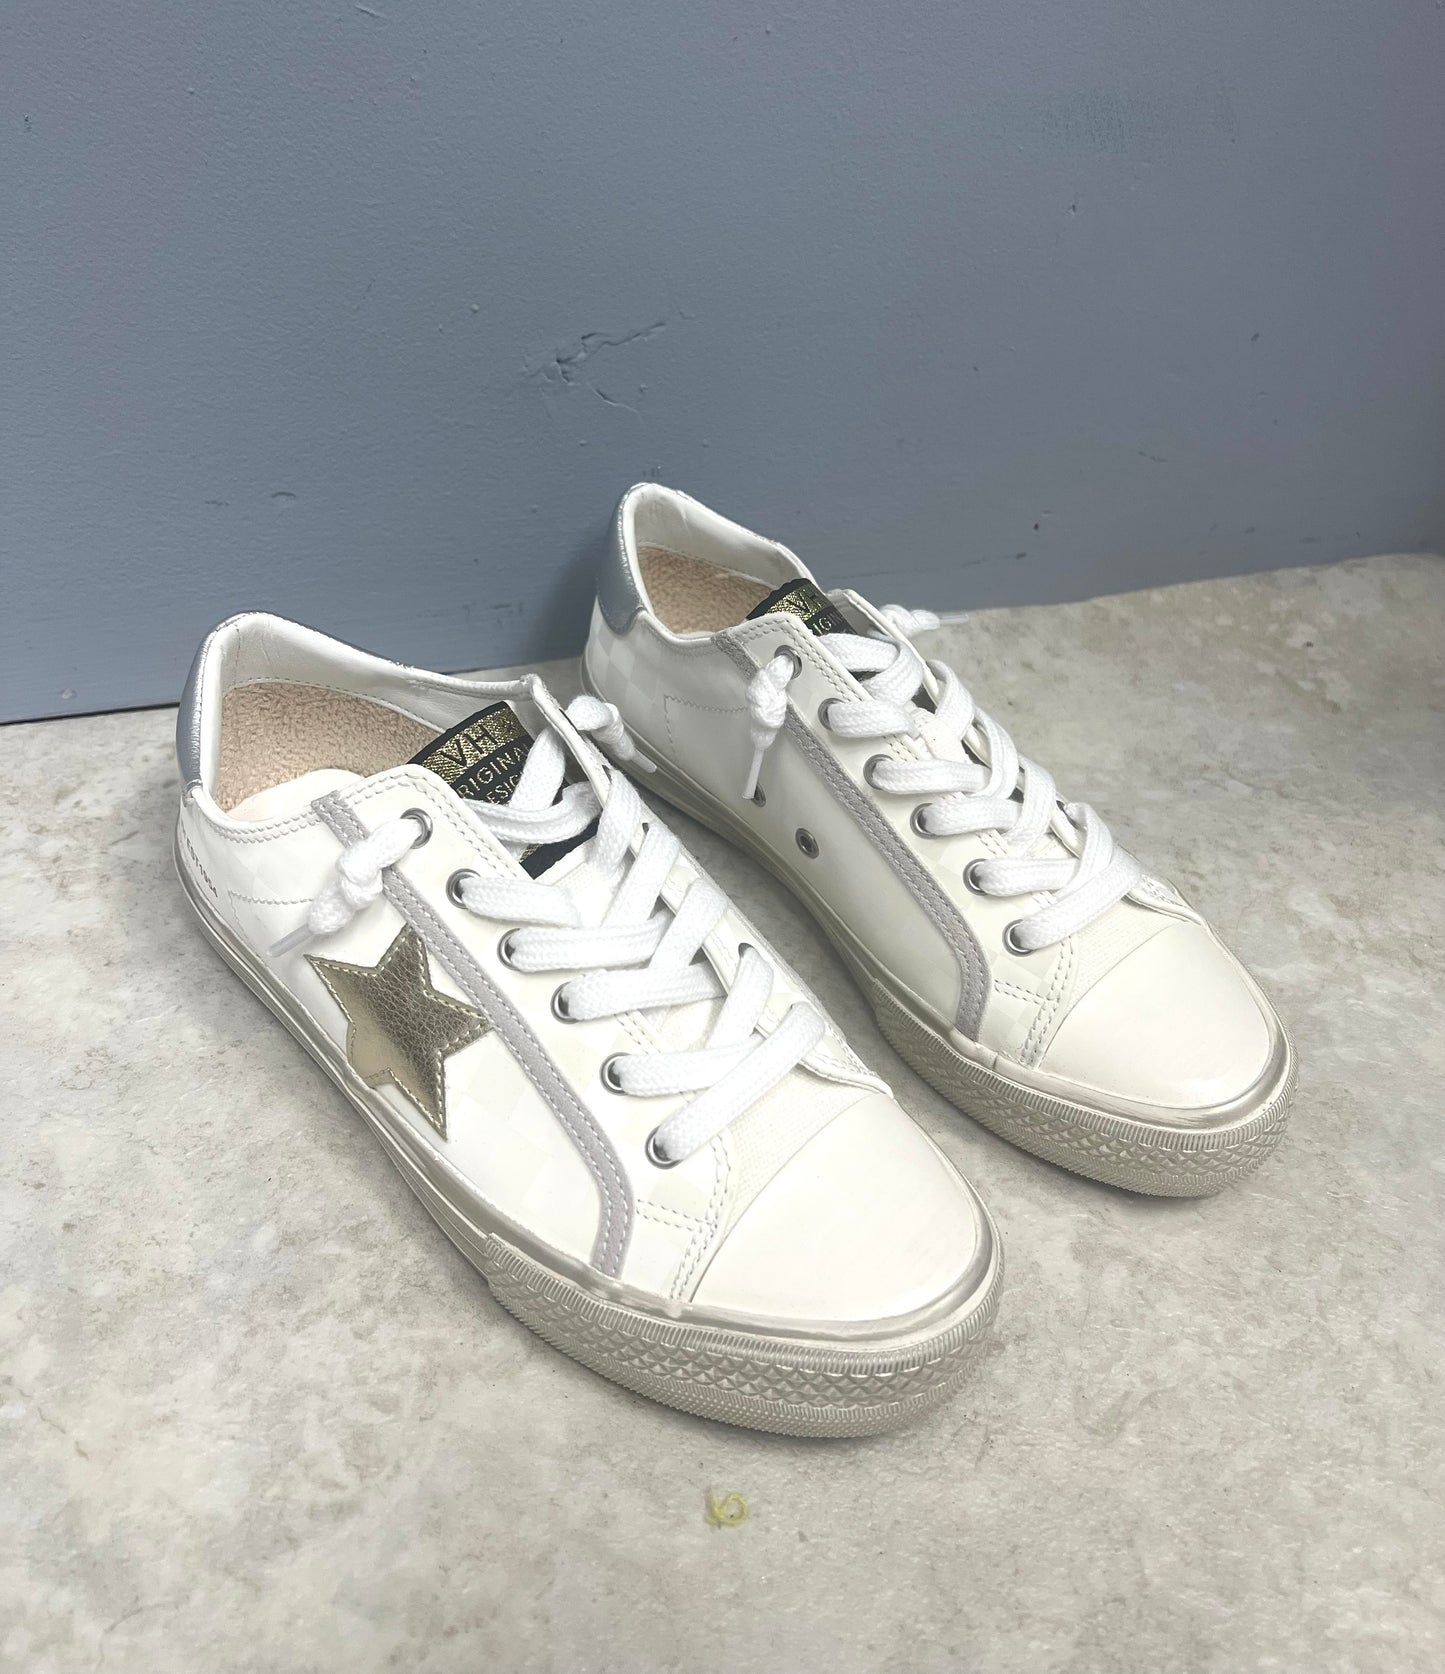 Alive 27 White Checkered Sneakers